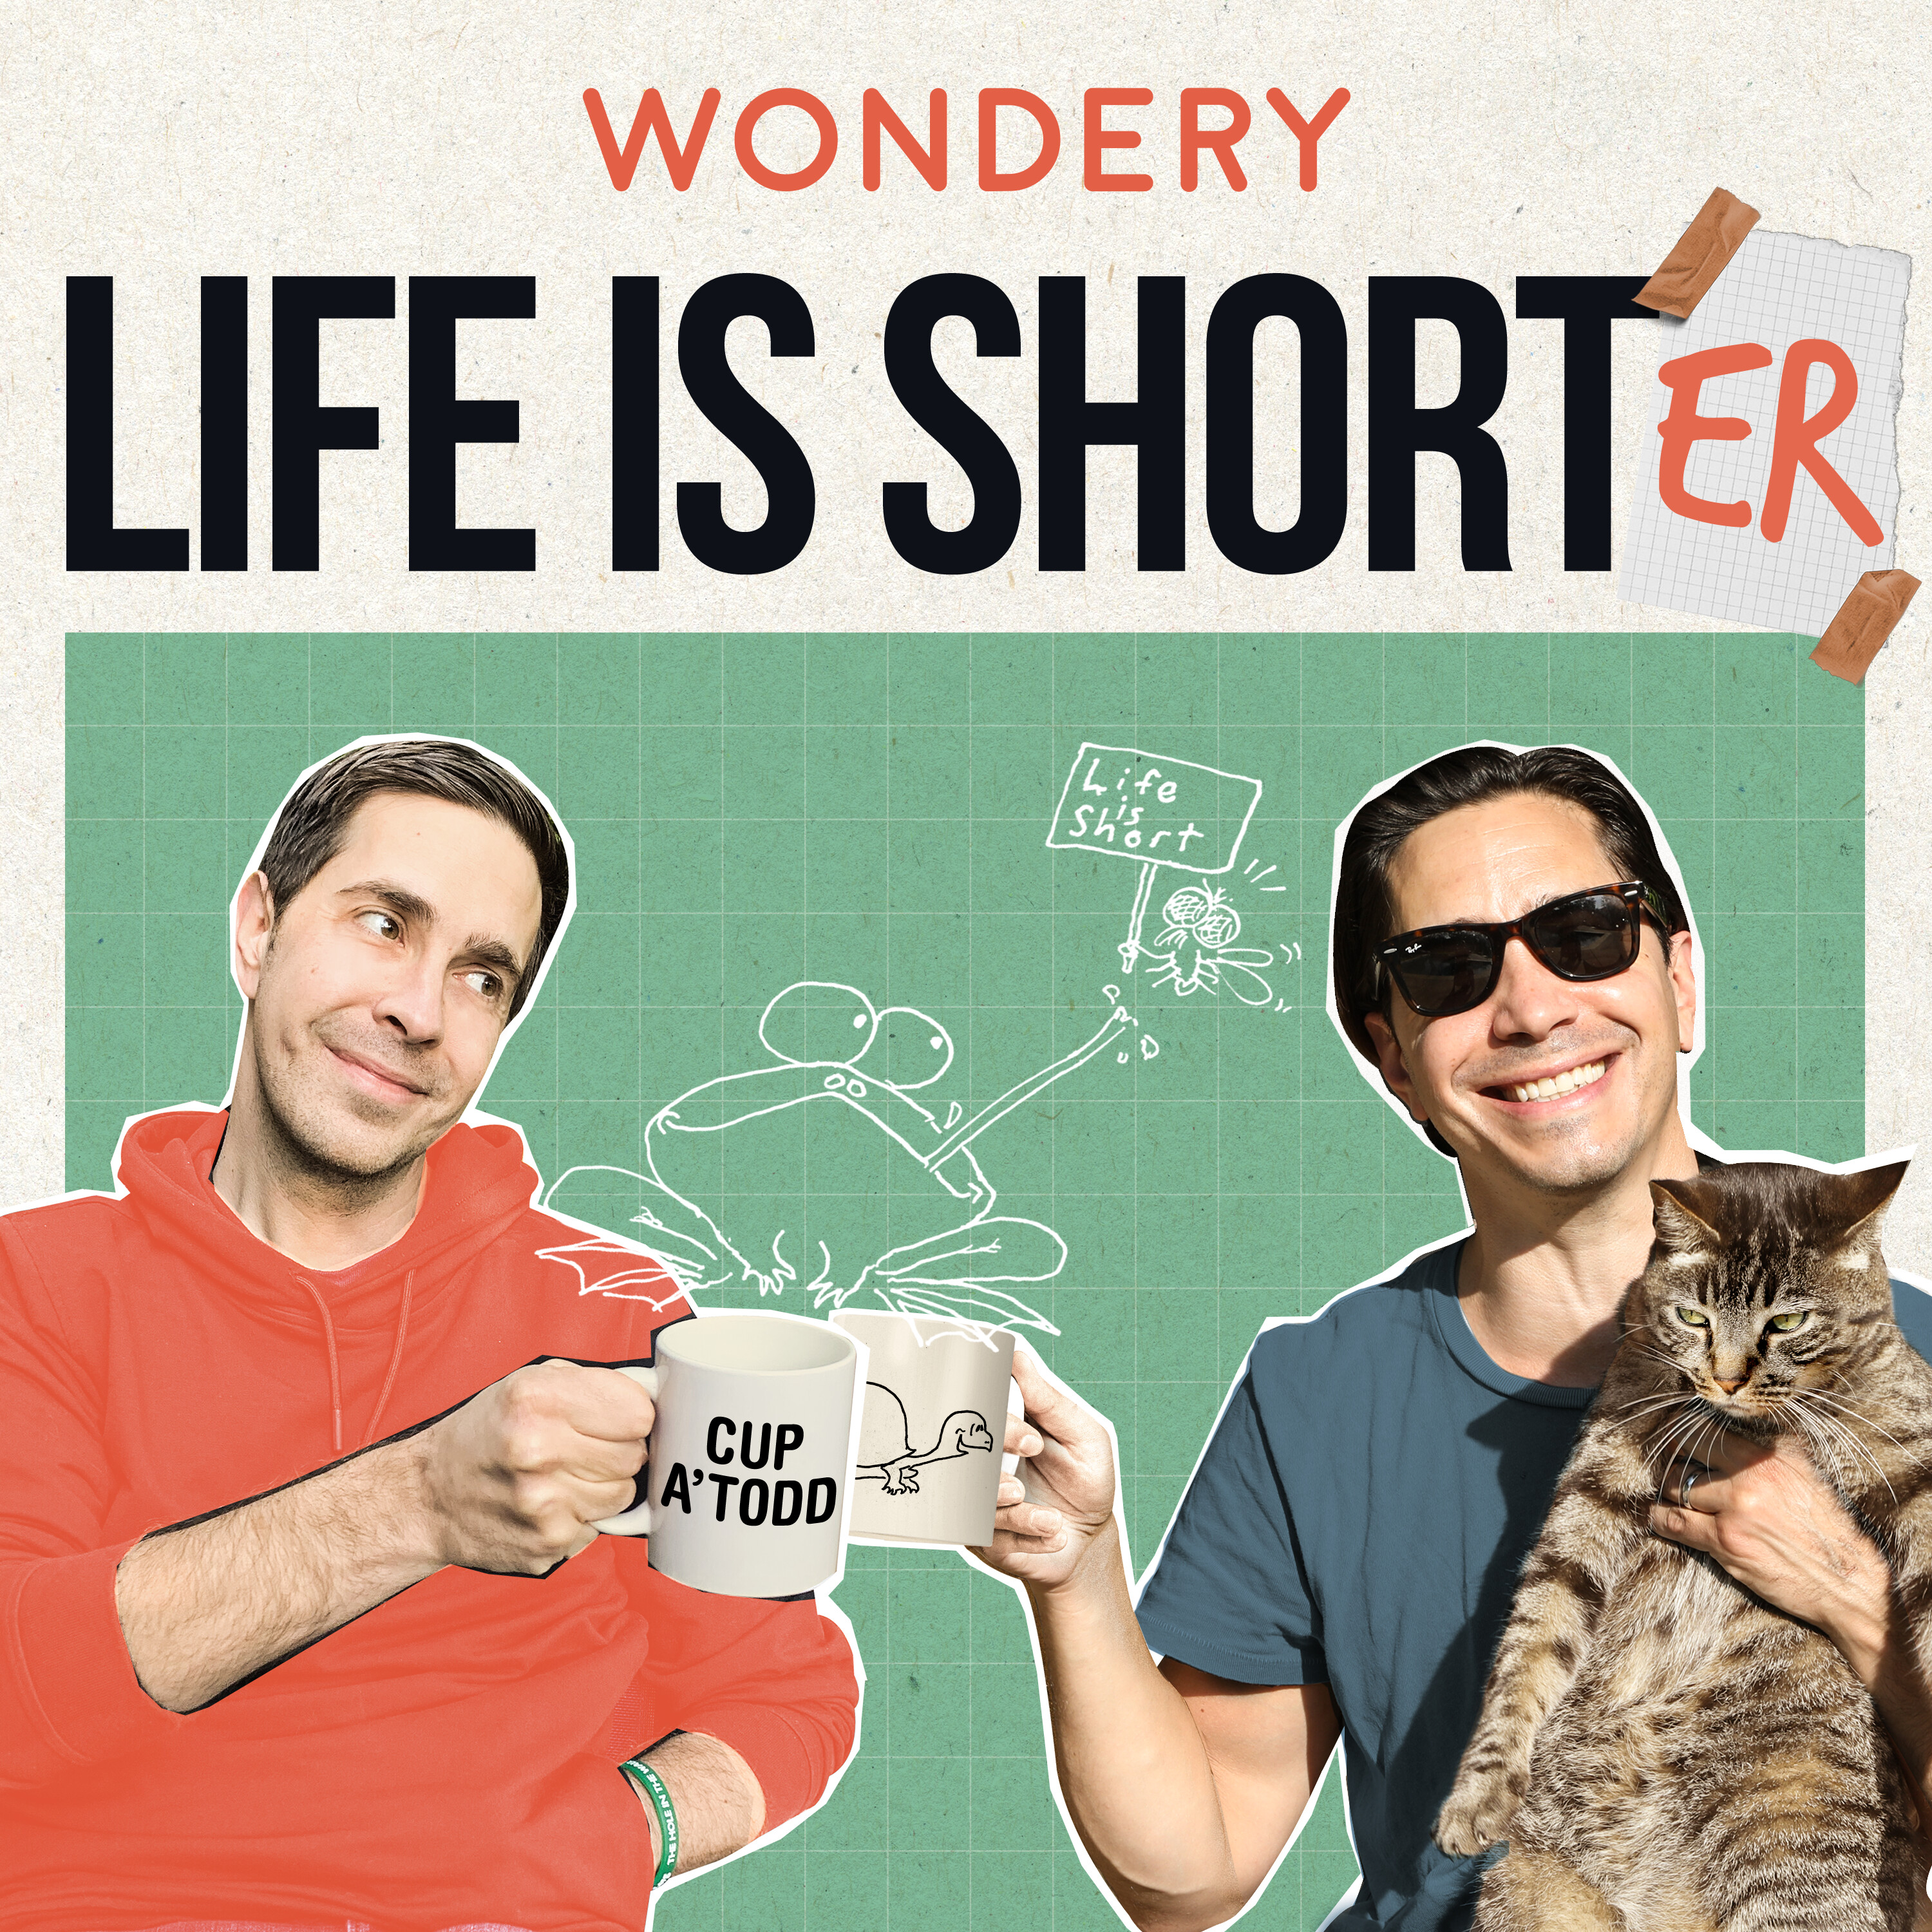 Life Is Short(er): Smodcastle, Betting Bros, and Pivoting 👻 by Wondery